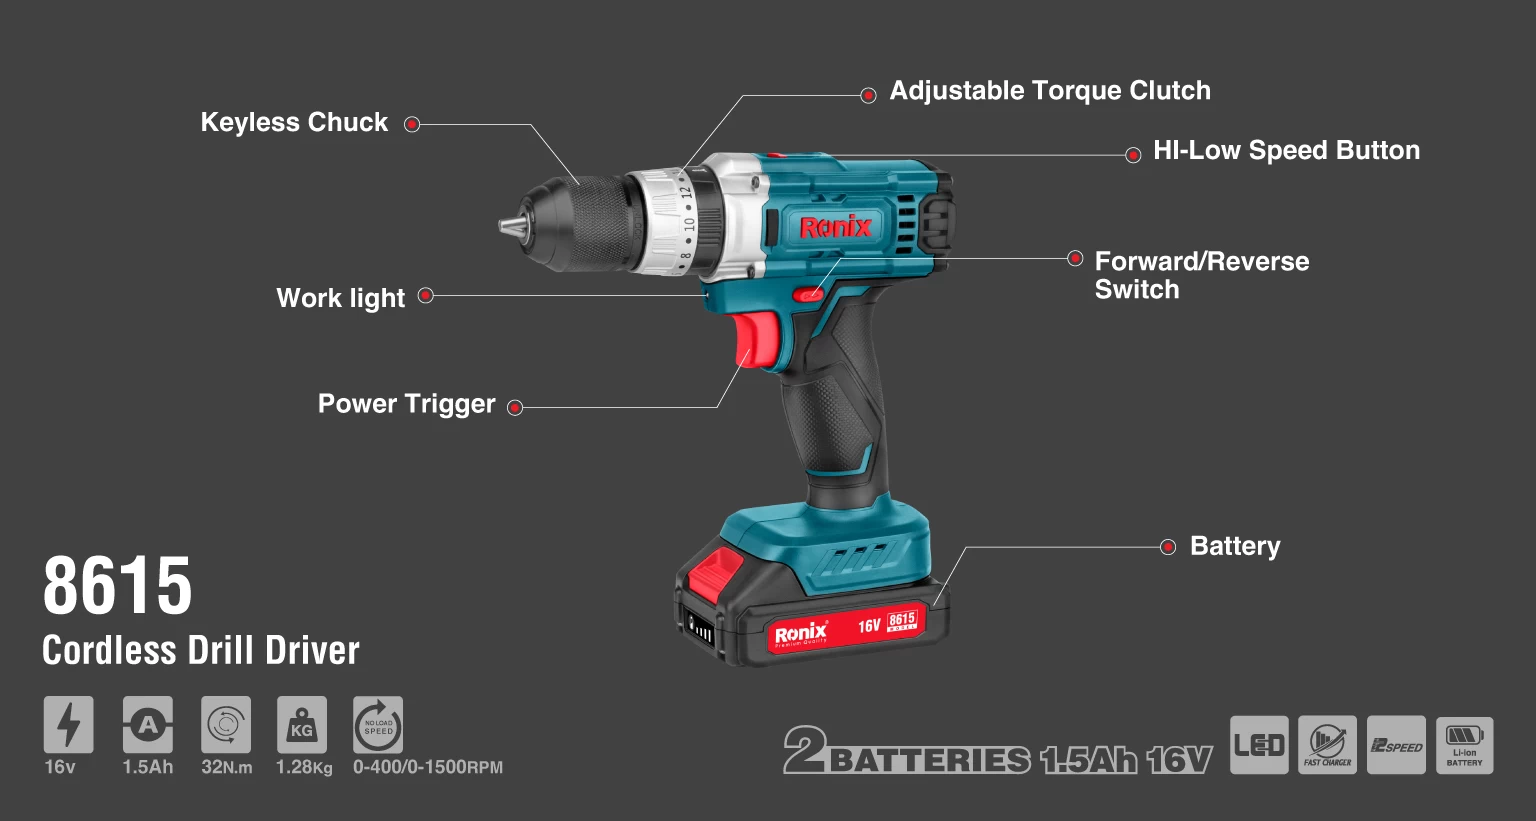 Mini Drill 12V 32N.m 2-Speed Electric Lithium-Ion Battery Cordless Drill 